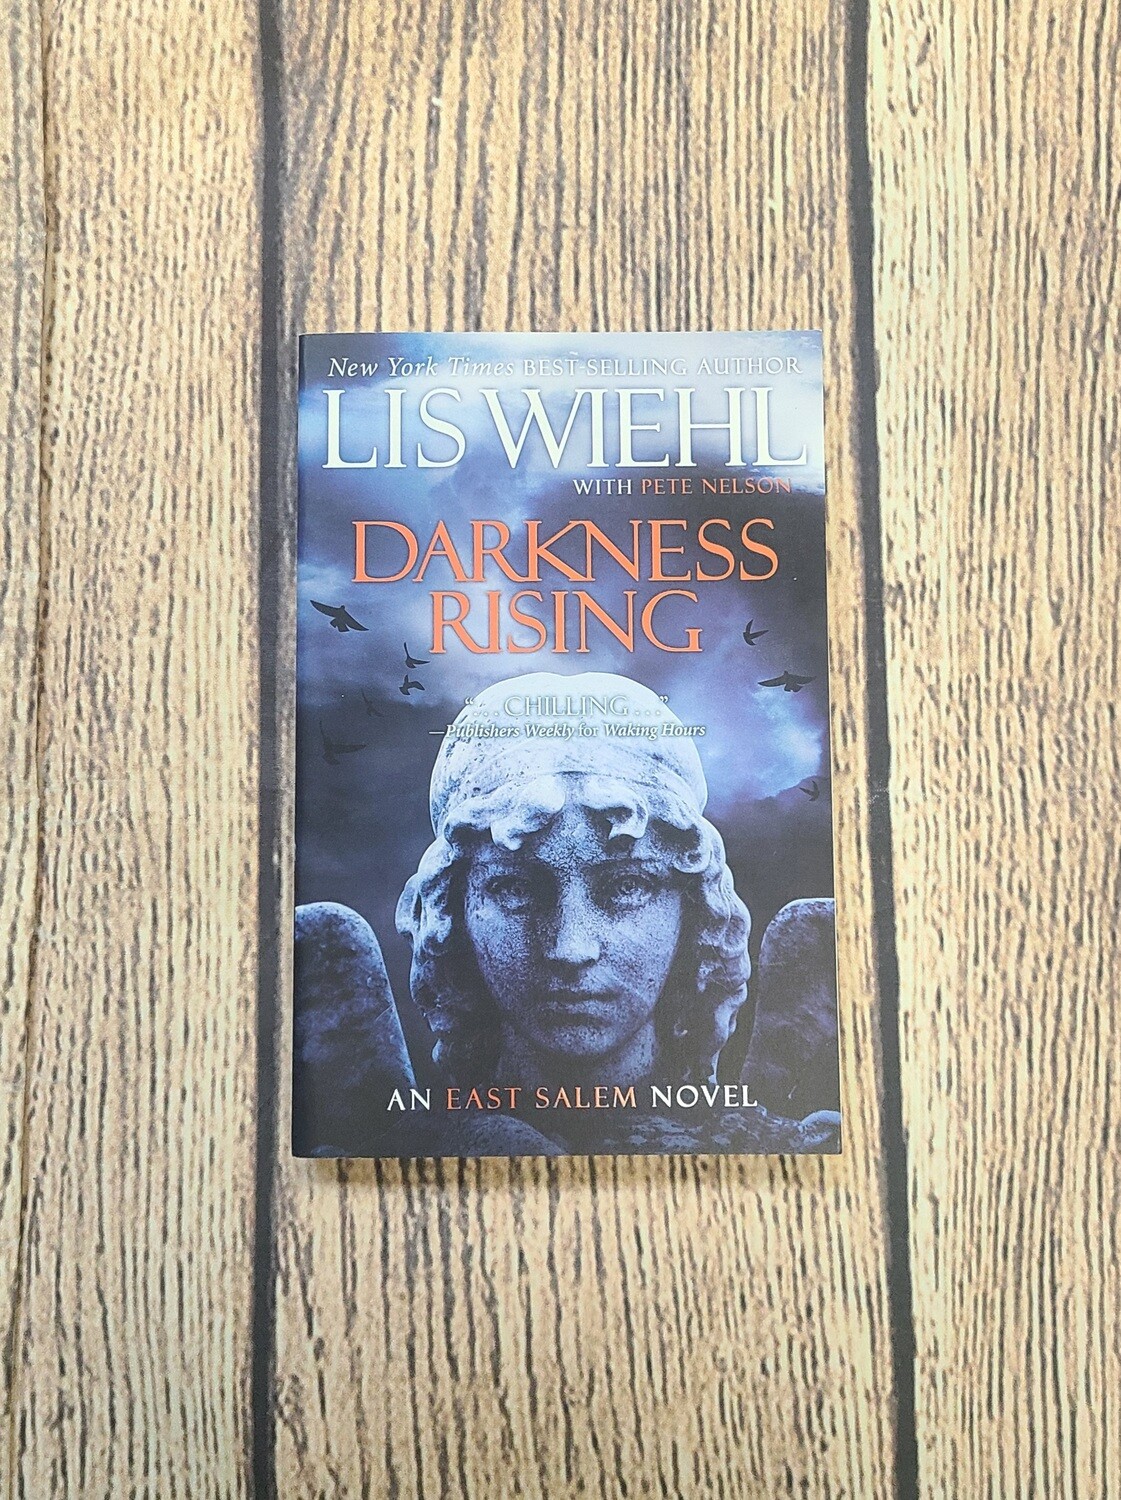 Darkness Rising by Lis Wiehl with Pete Nelson